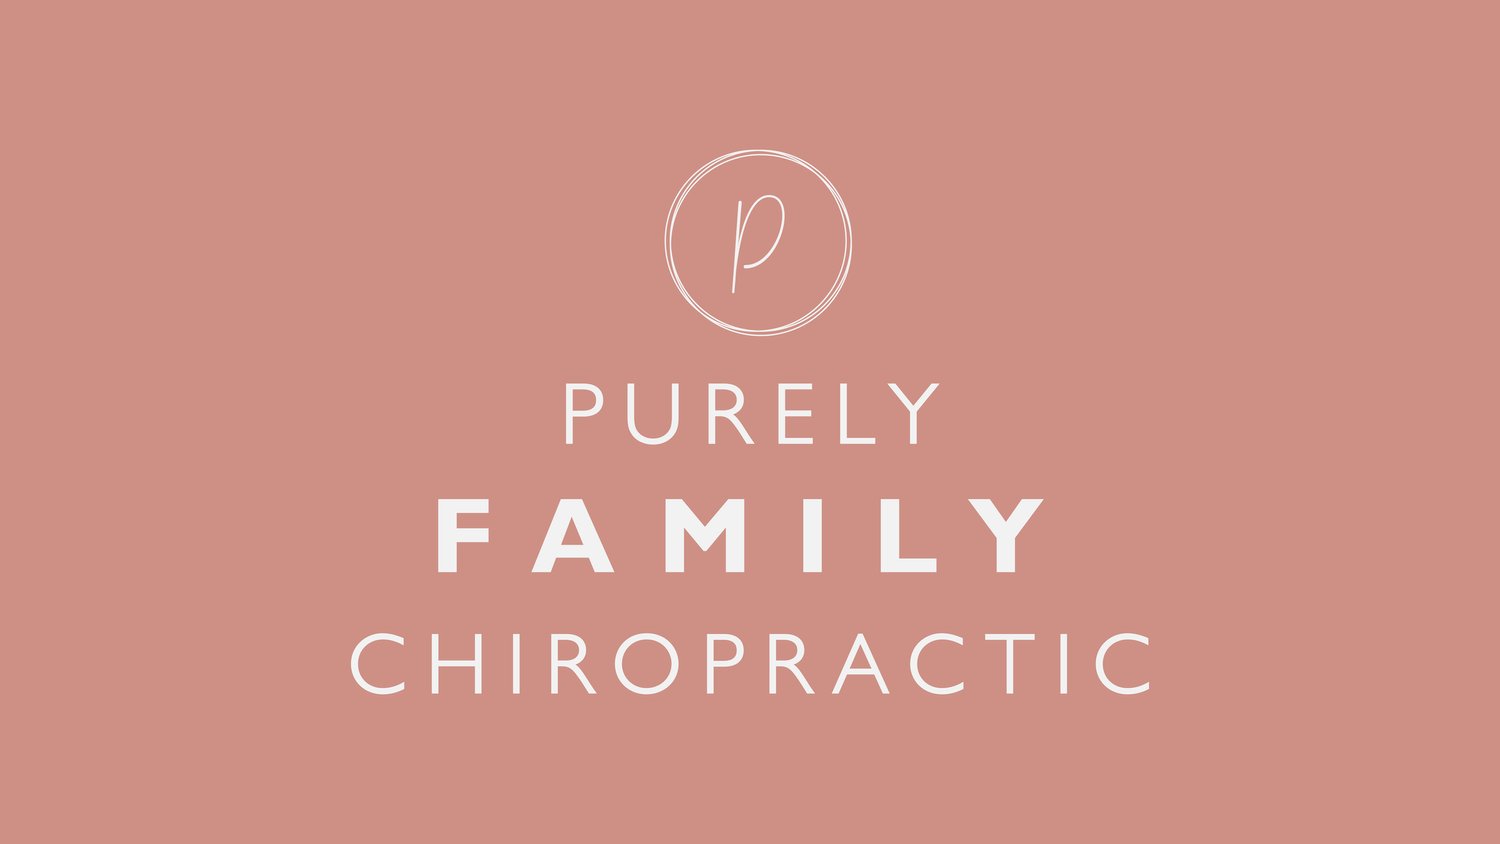 Purely Family Chiropractic